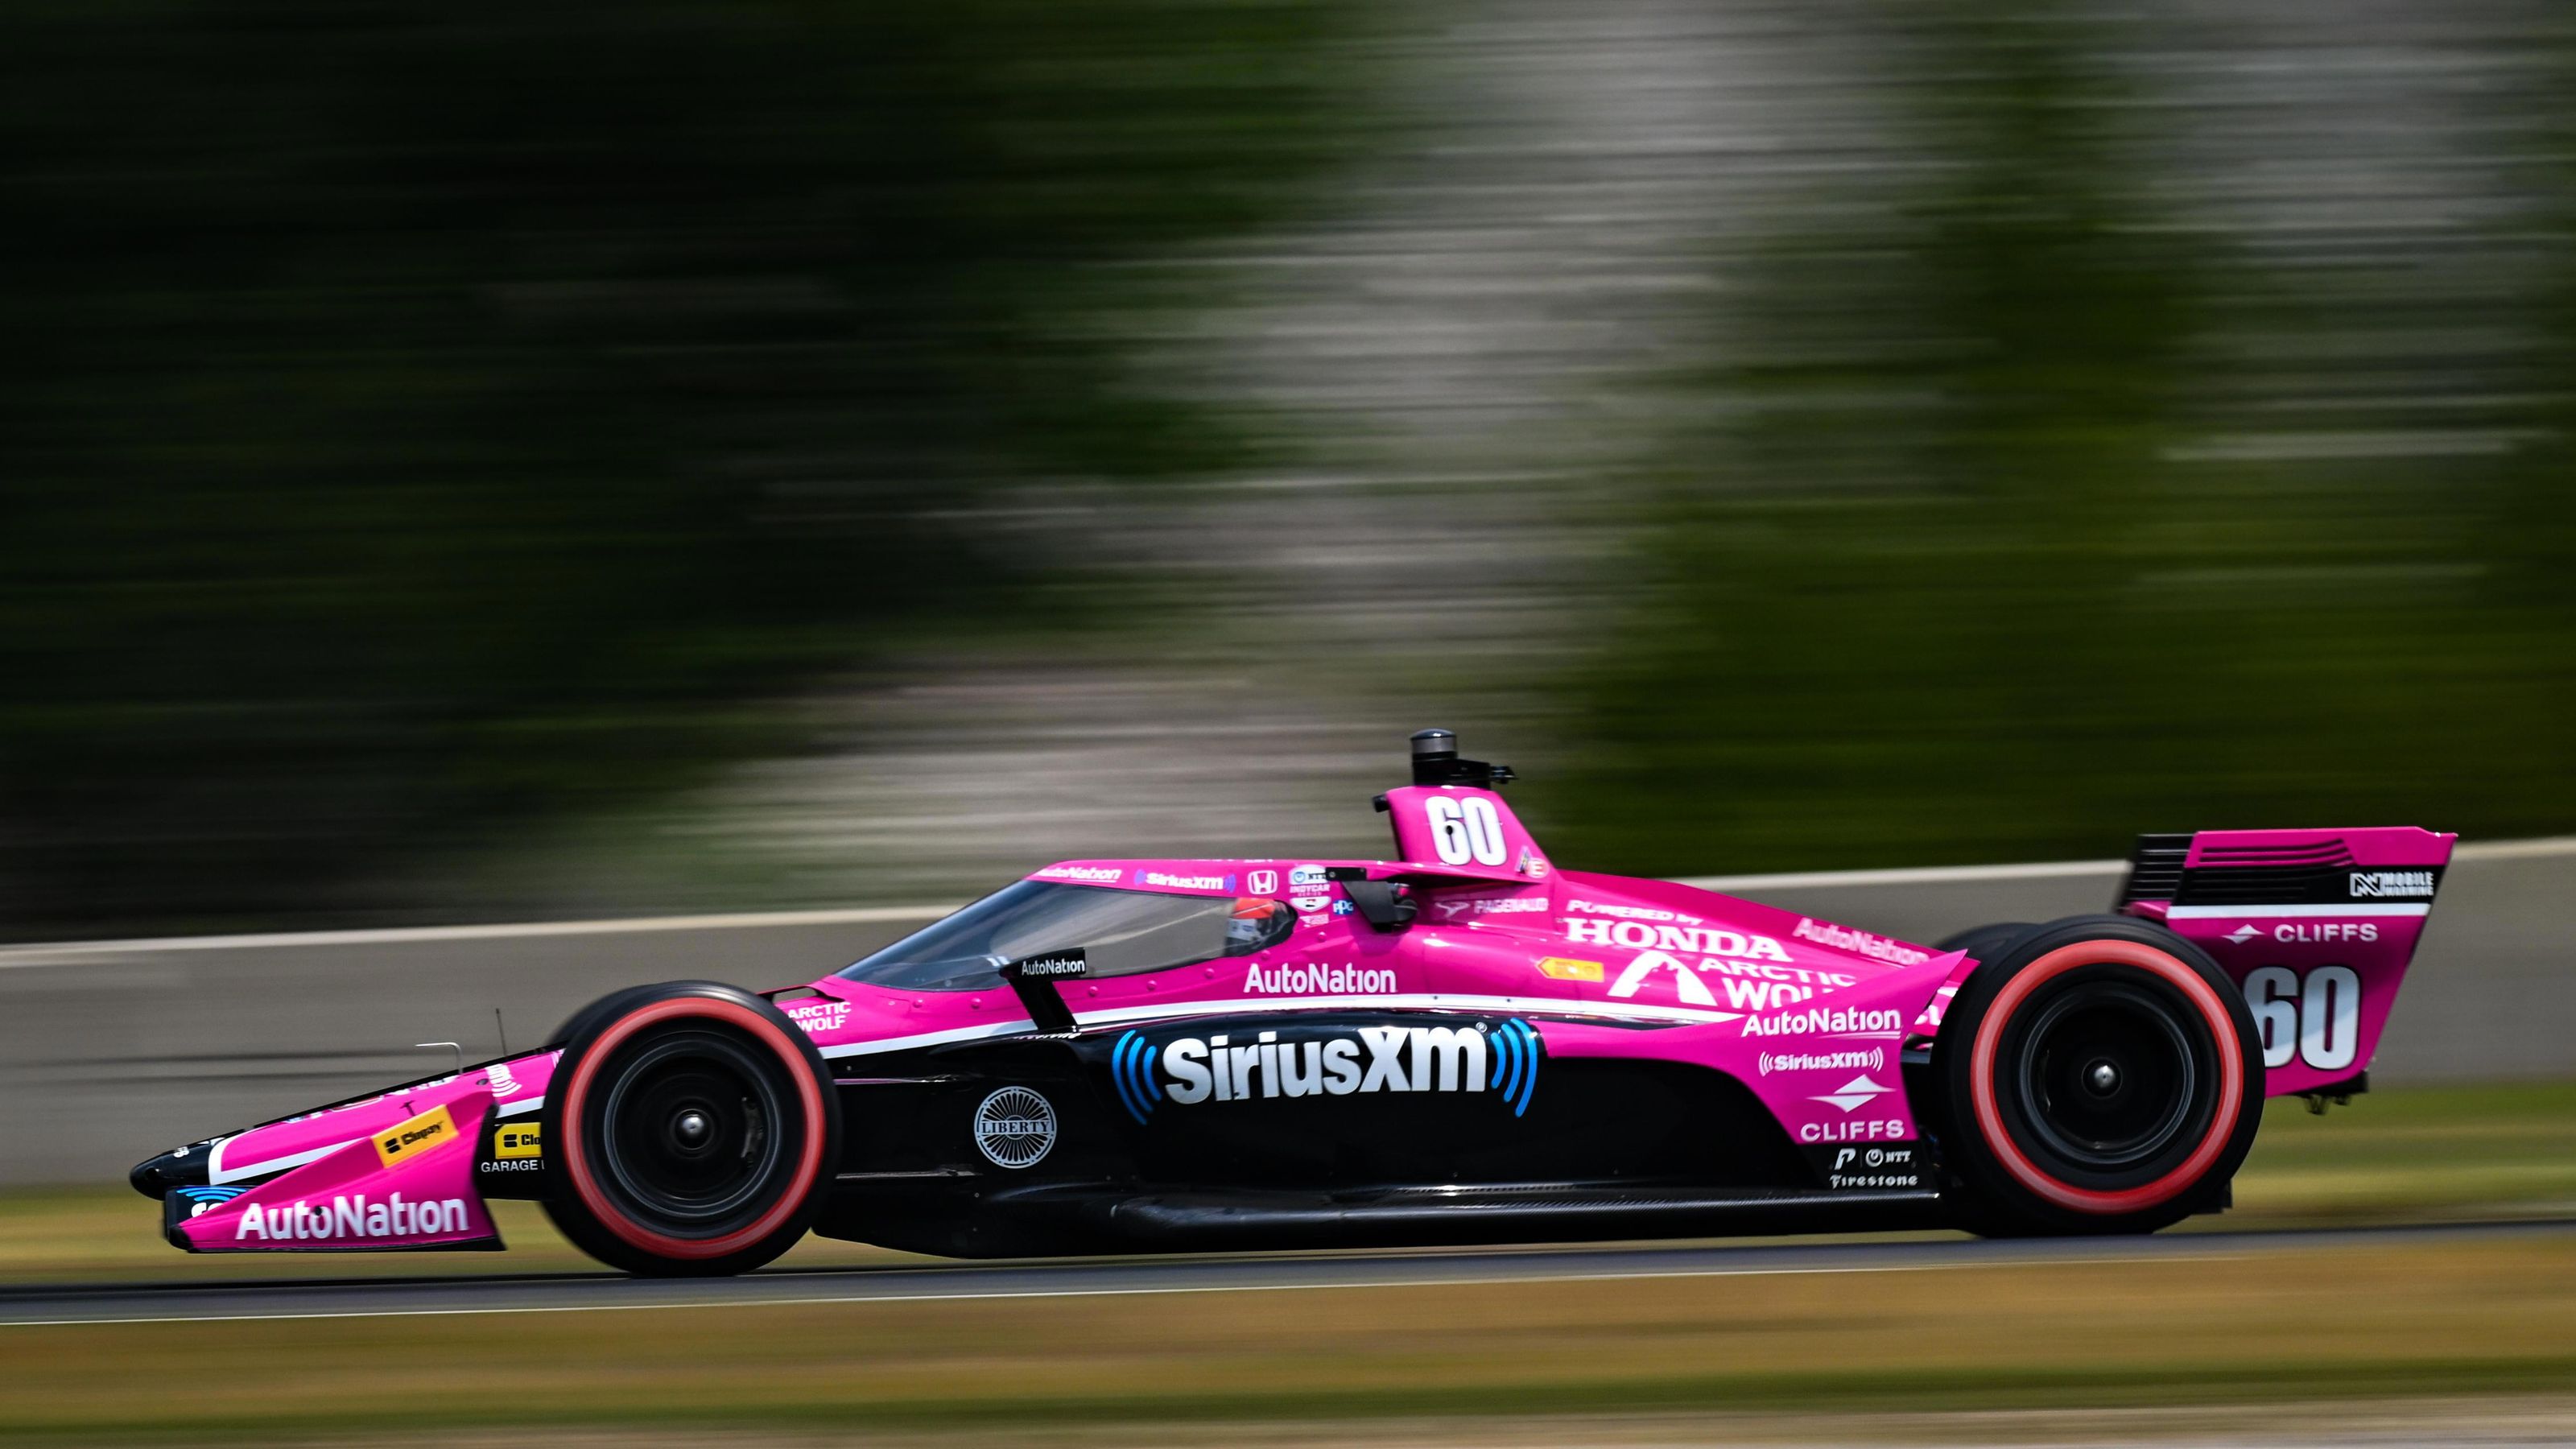 Tom Blomqvist will drive the No.60 for Meyer Shank Racing in place of Simon Pagenaud.